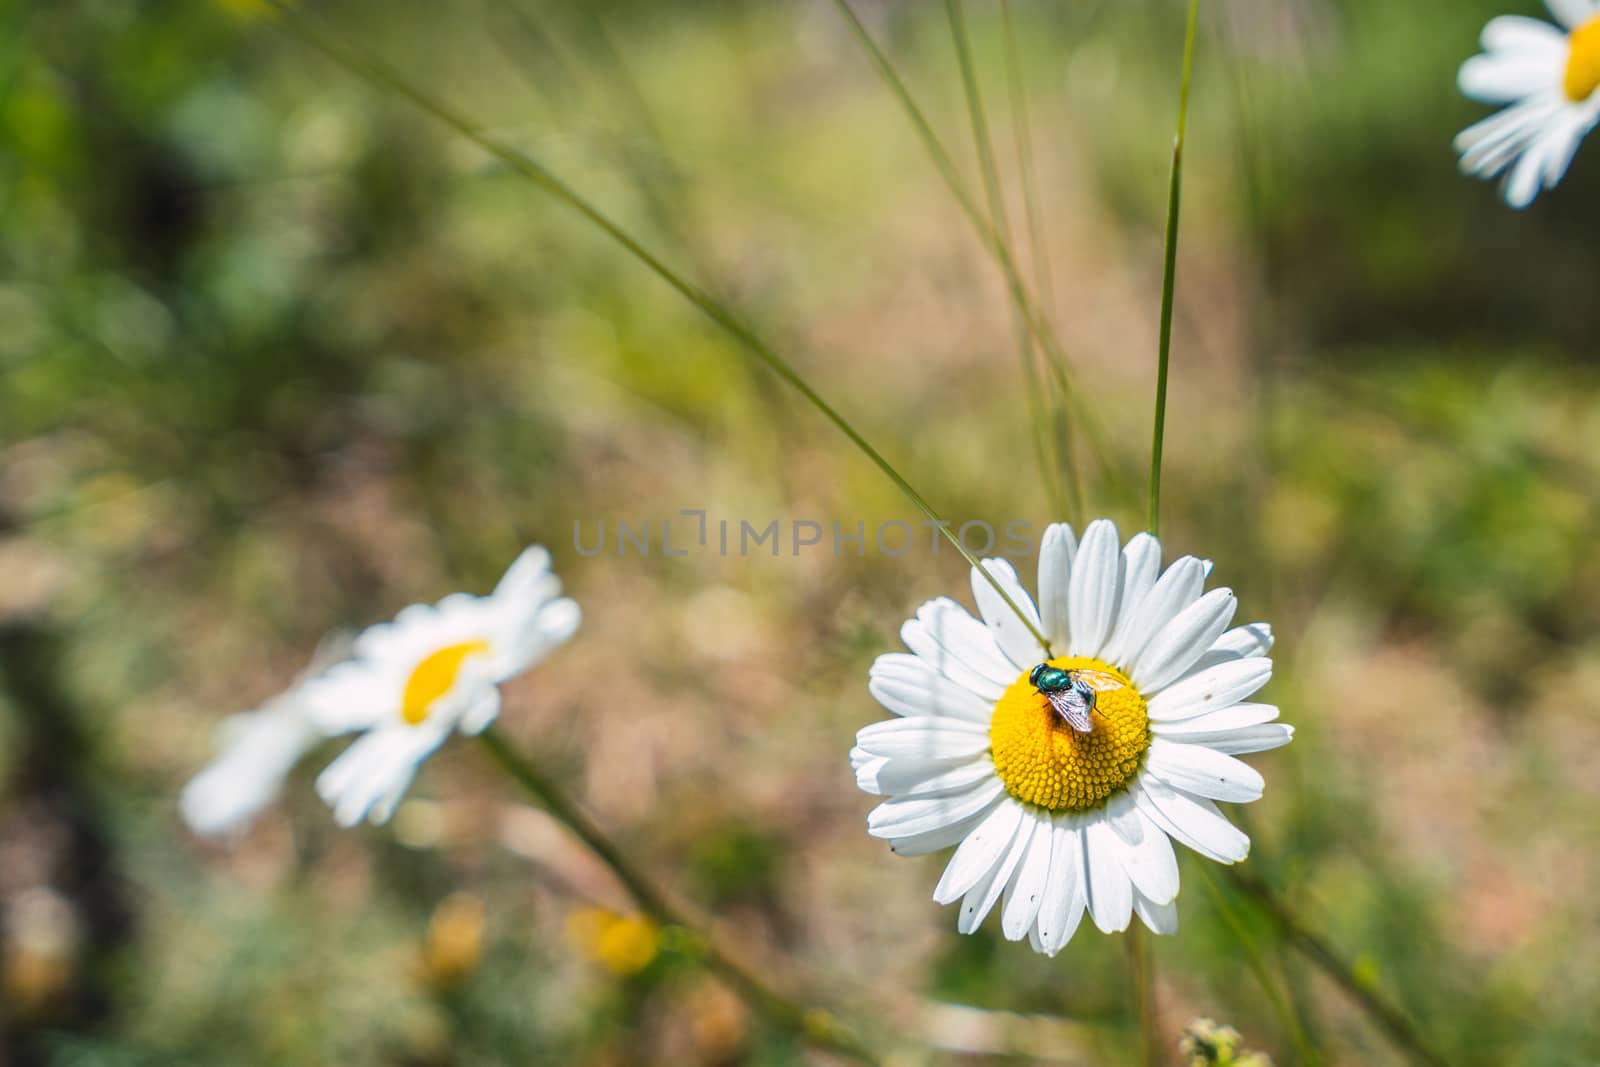 Daisy flower with green fly Phaenicia sericata on a meadow in the Pyrenees mountains